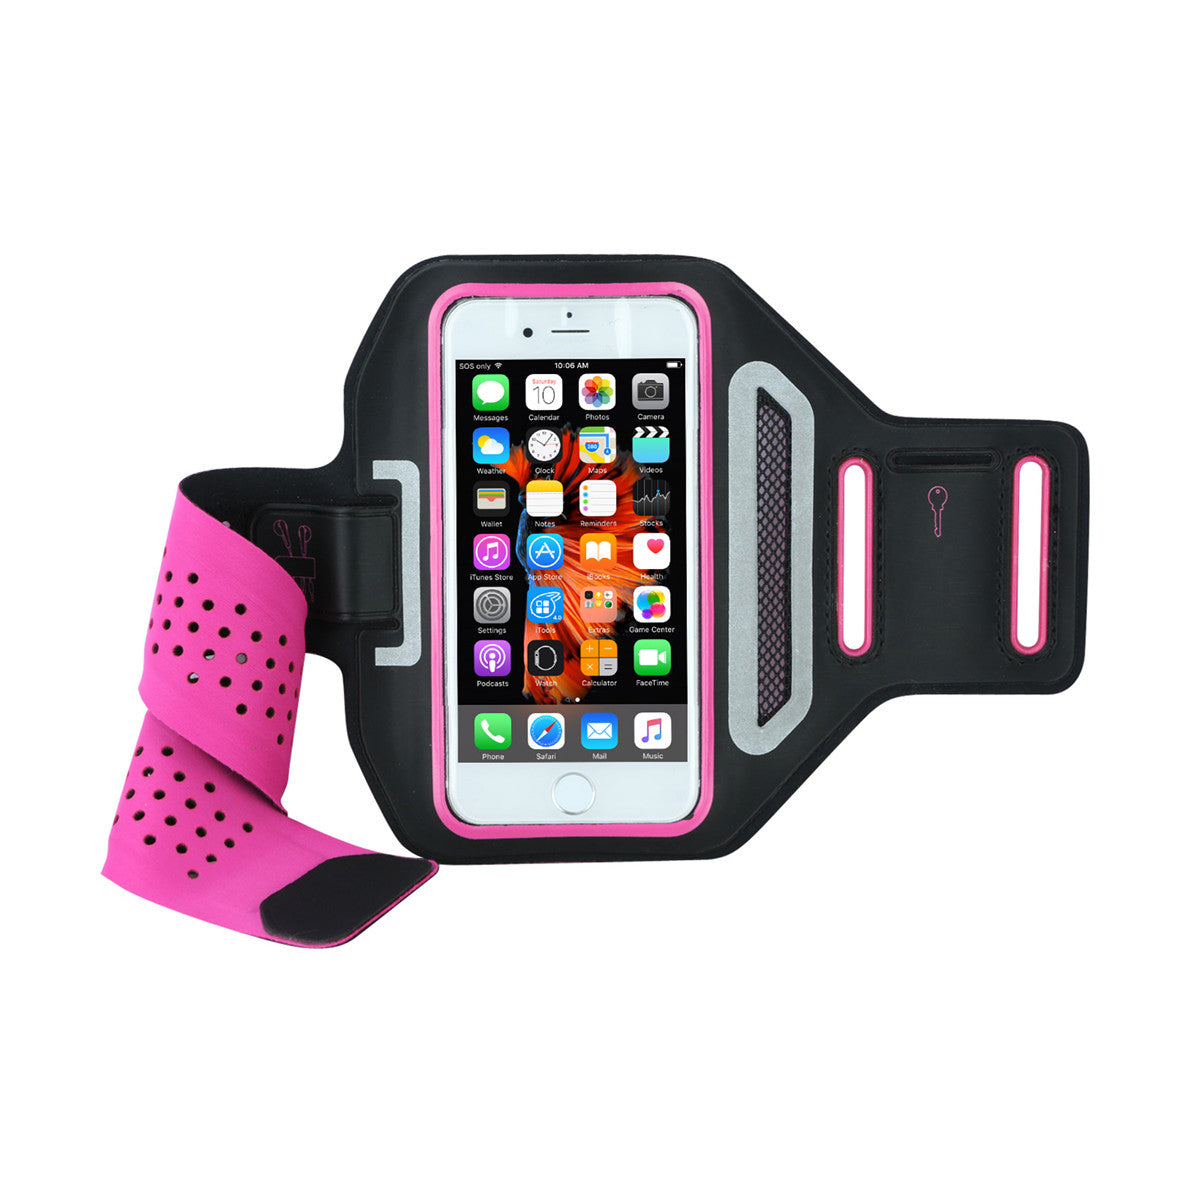 Mobile Mob Airvent Gym Running Armband For Apple iPhone X 8 7 6S 6 SE 5S (Upto 4.7") Hot Pink  